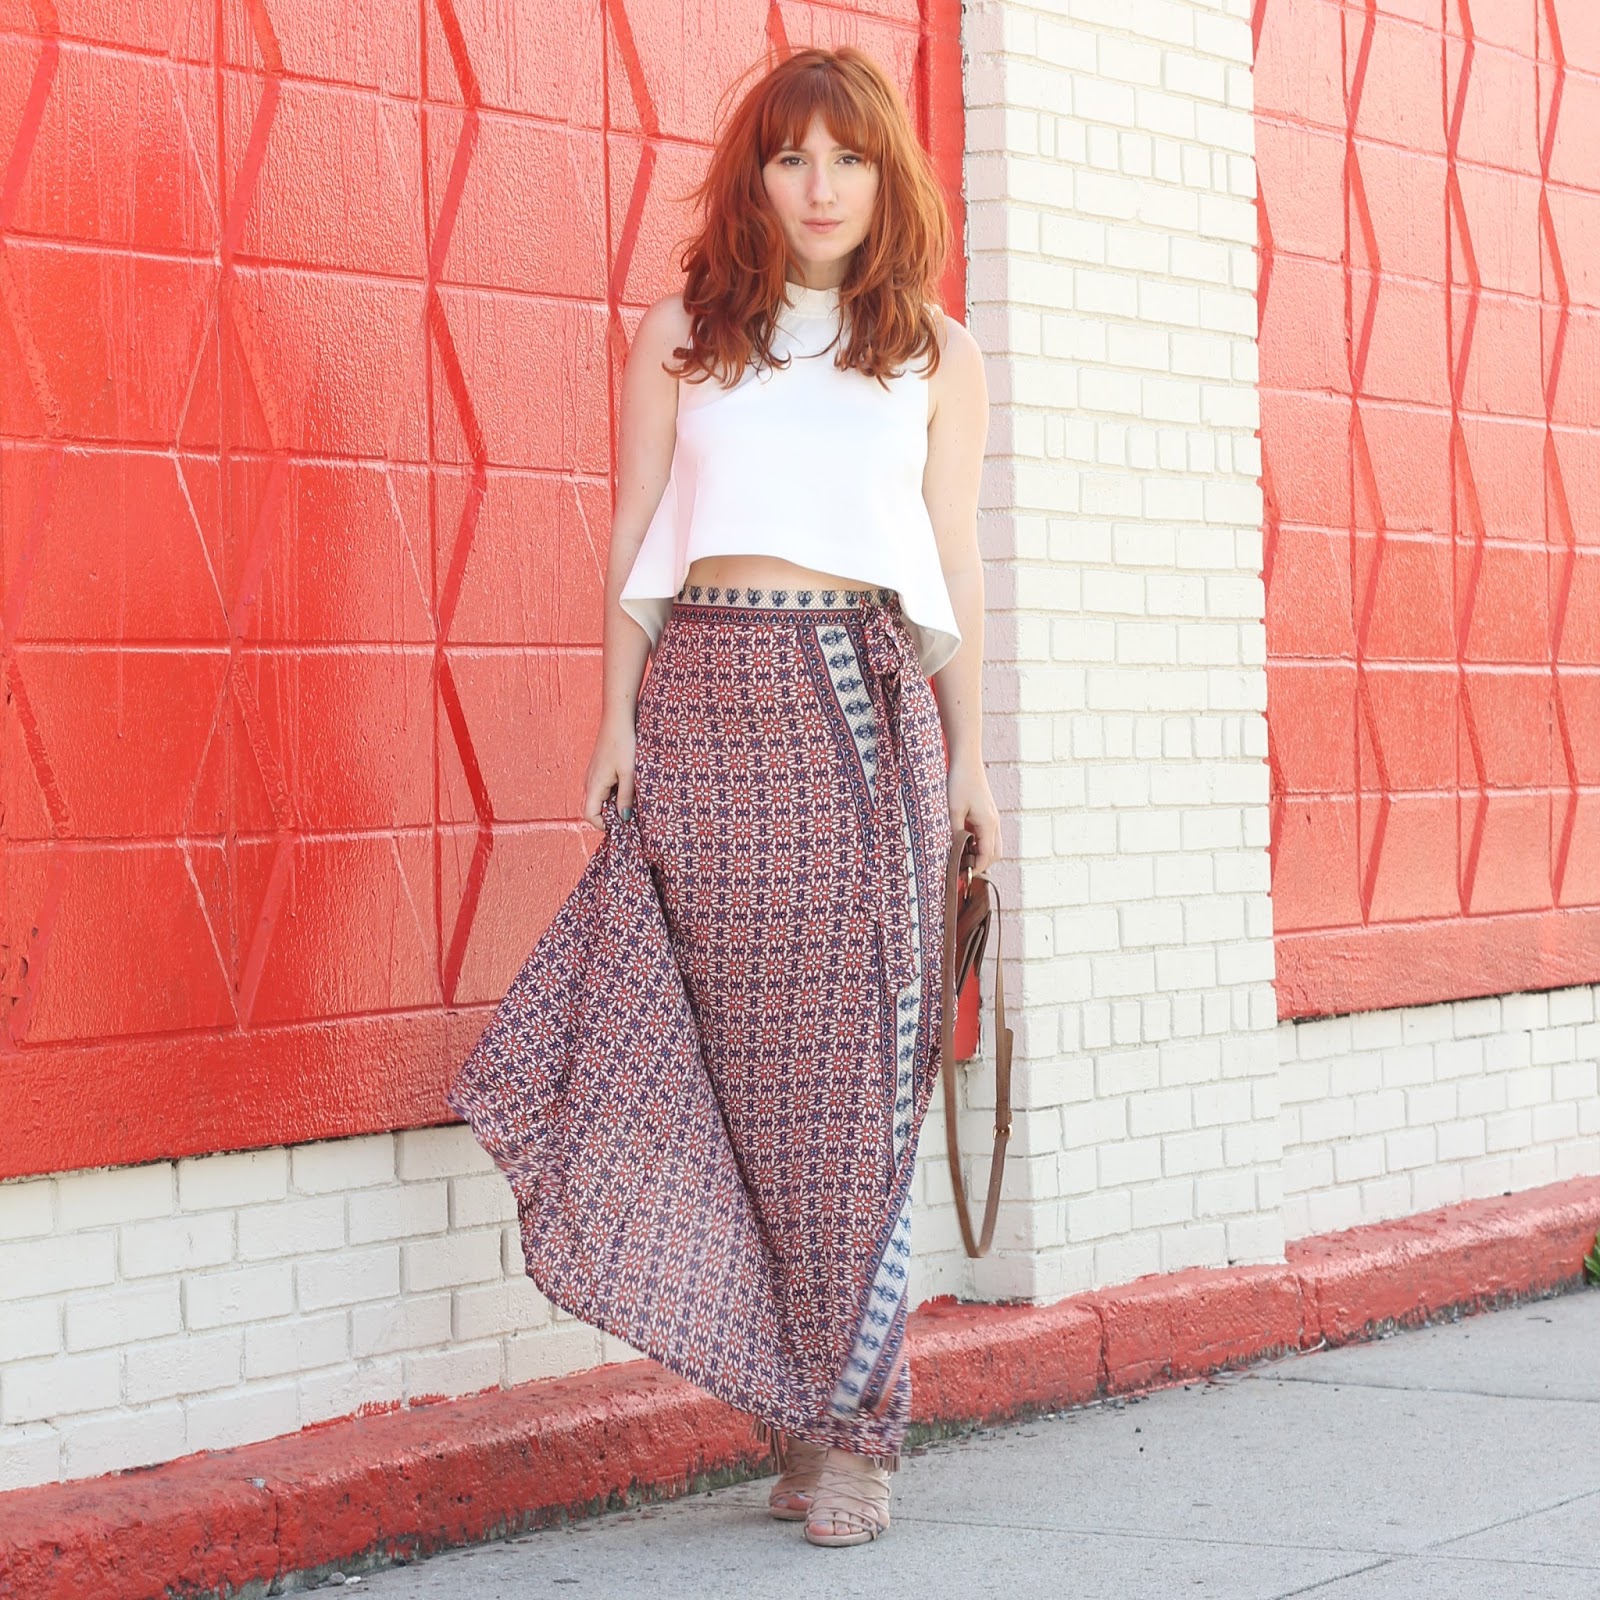 Red Wrap Skirt and White Cropped Top - TfDiaries